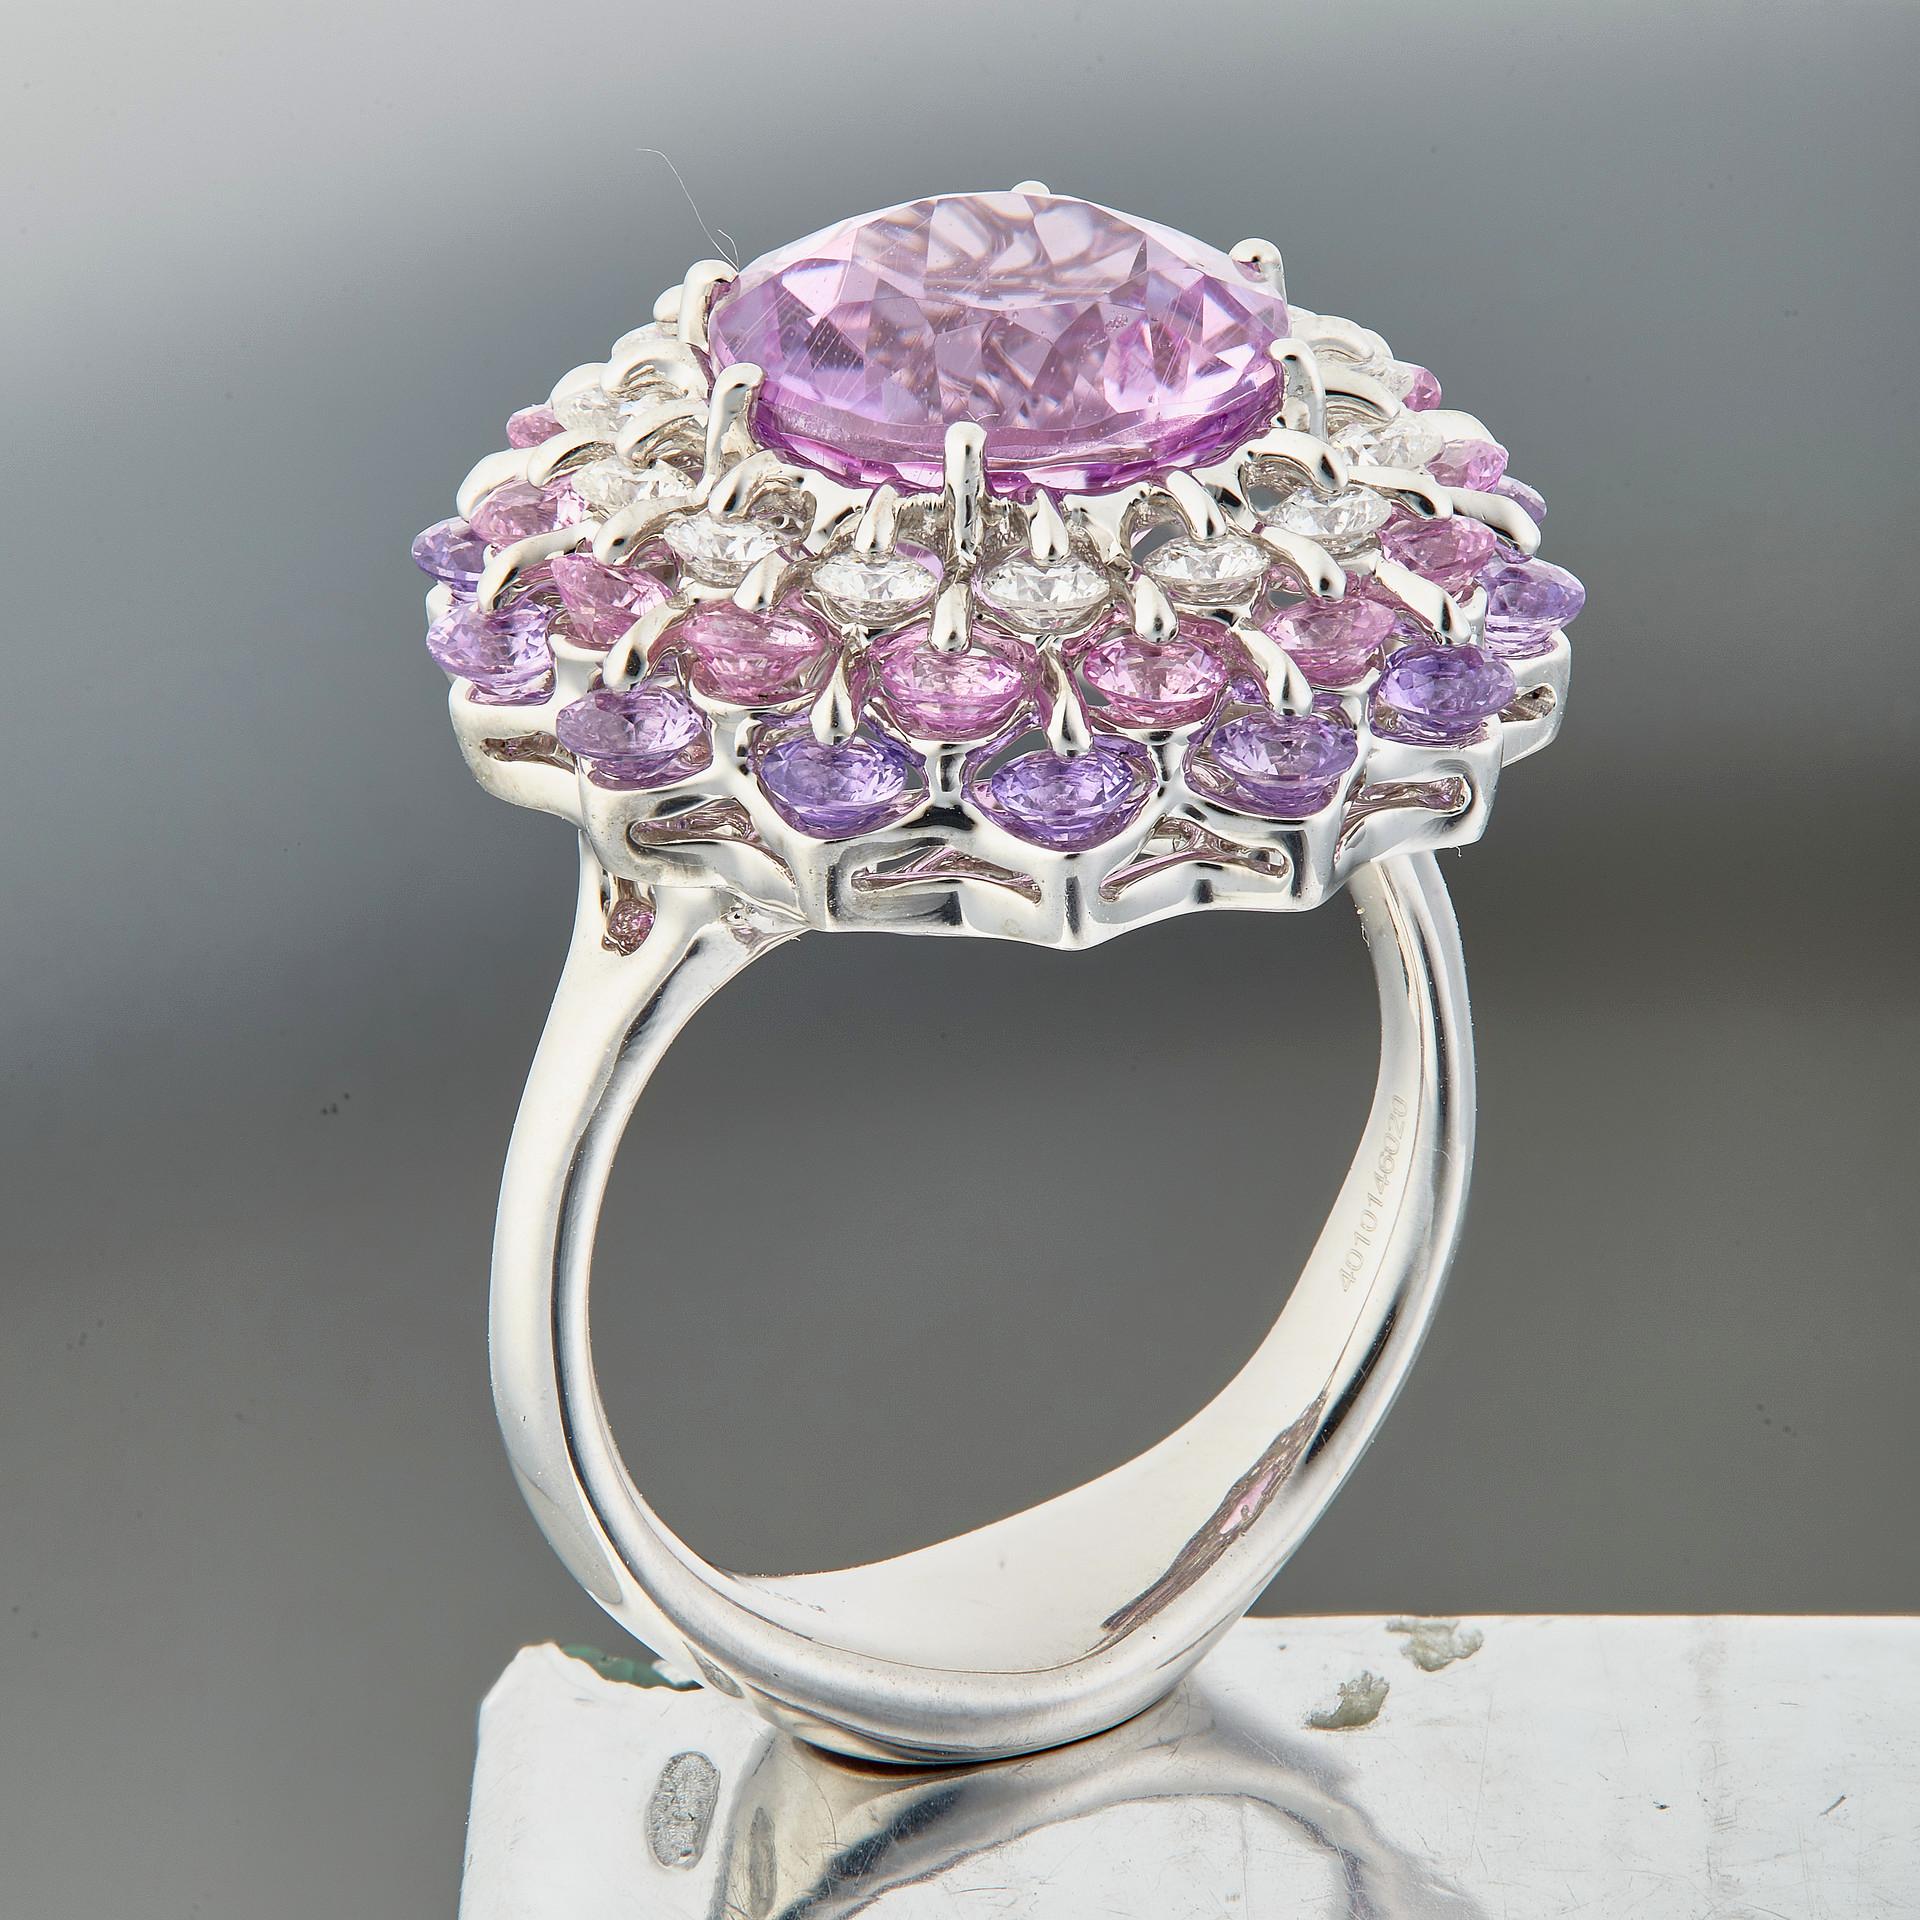 Deep pink facet Kunzite is mounted in state of the art design and technology. Internationally patented, Waltzing Brilliance technology is an innovative jewellery invention patented by Viktor Moiseikin, which a diamond facet gem is secured by two